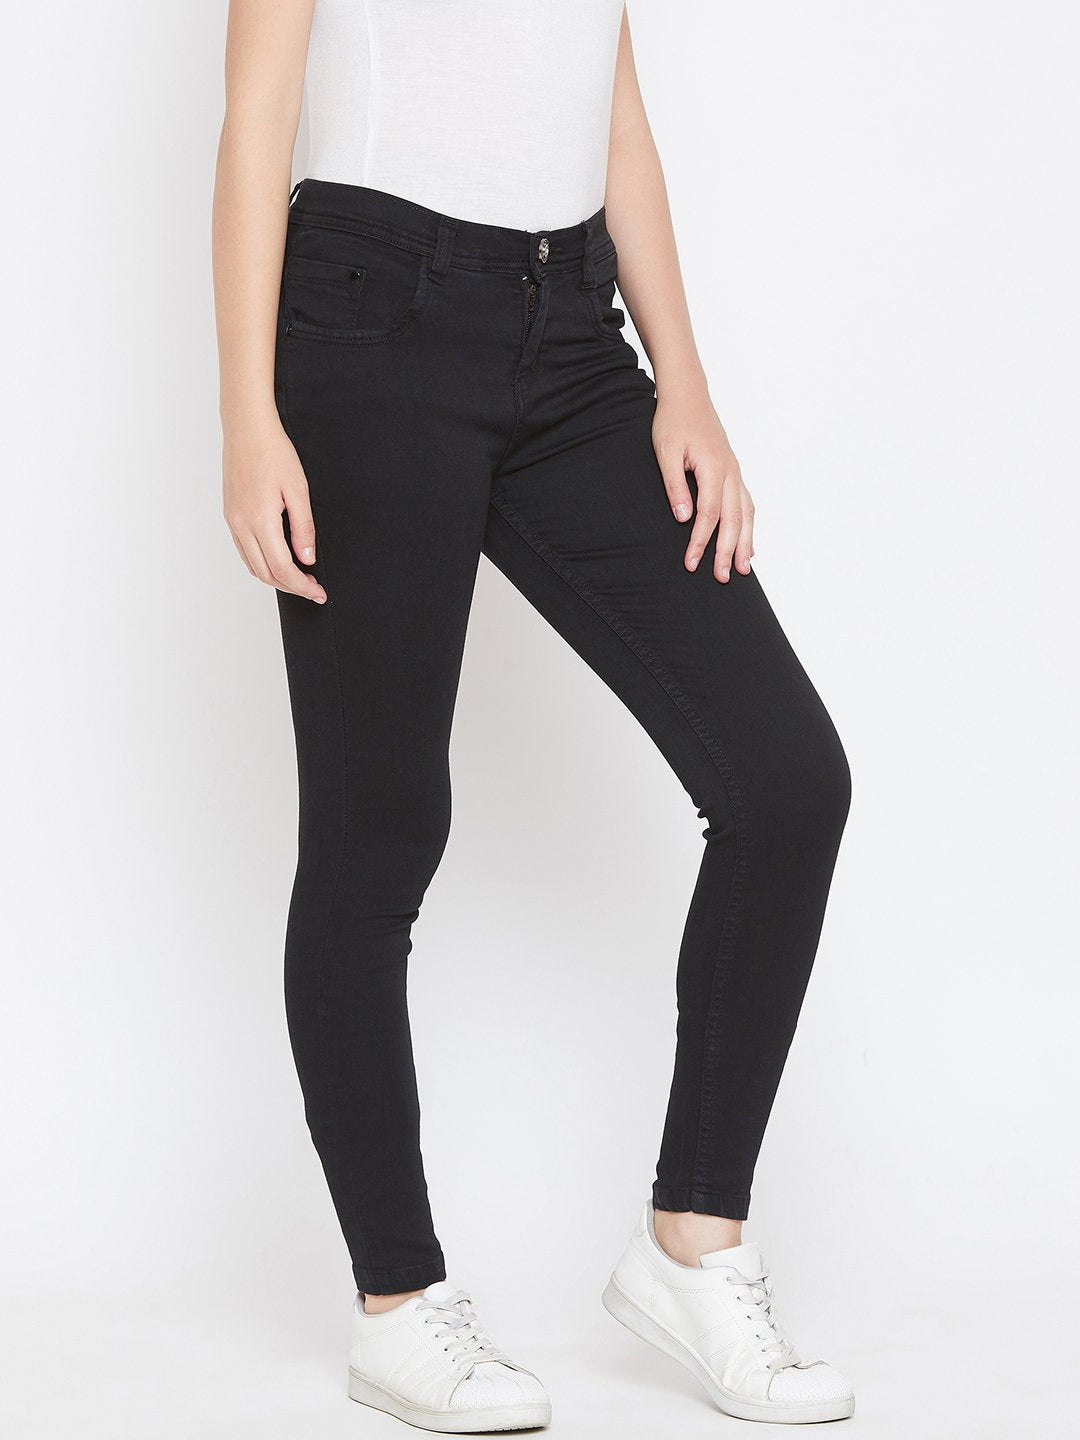 Slim Fit Stretchable Black Jeans - NiftyJeans